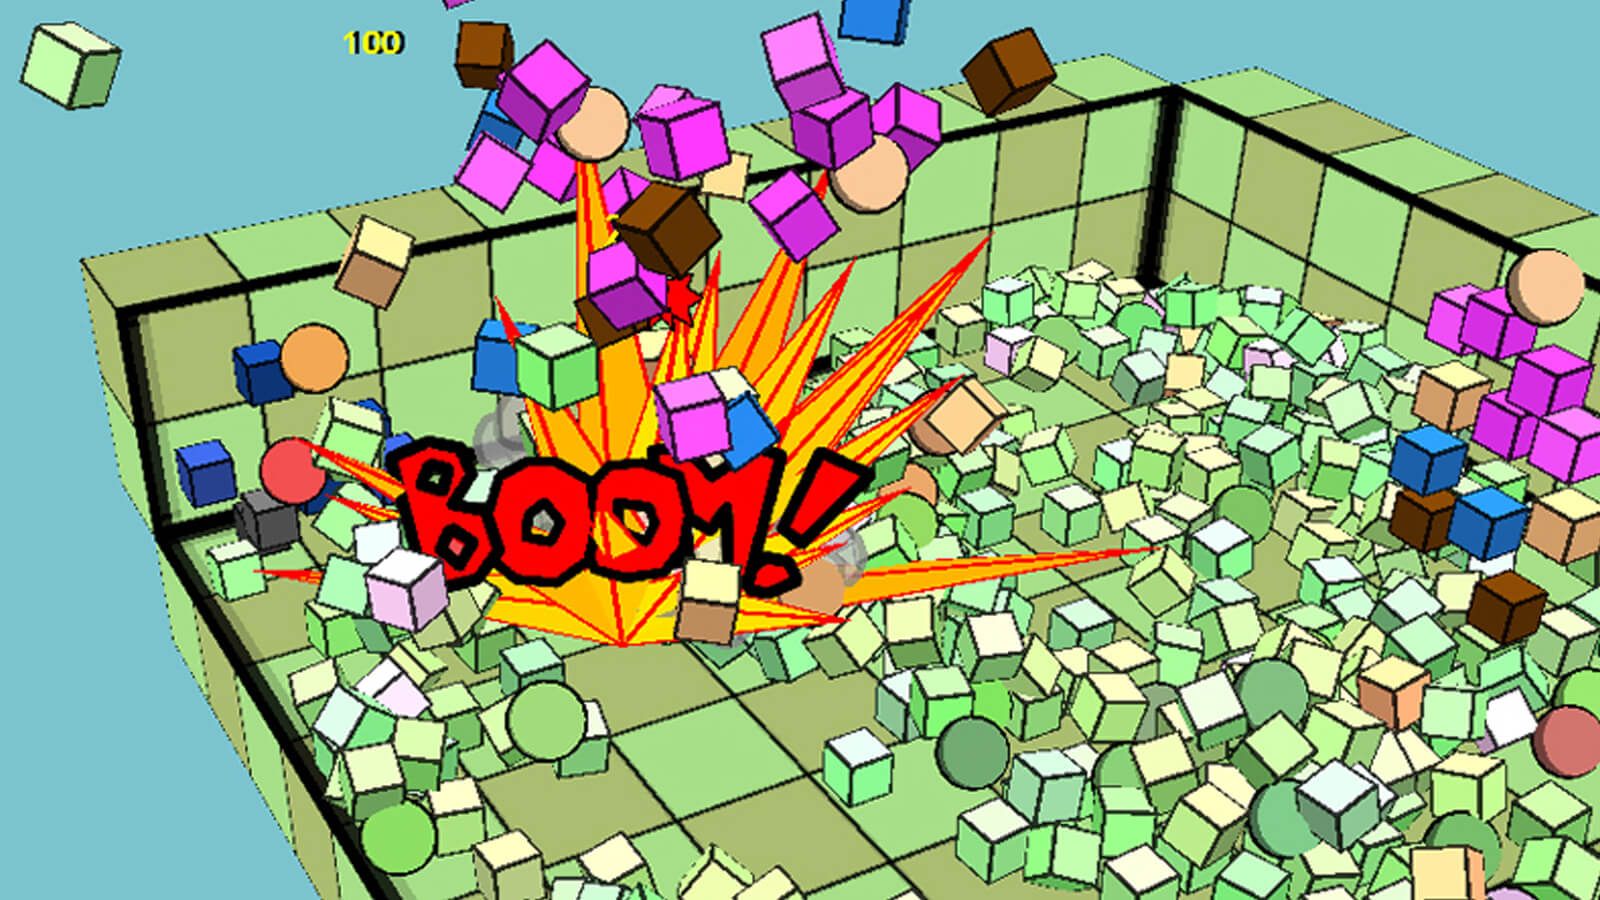 An enemy explodes into blocks with the word "BOOM!"